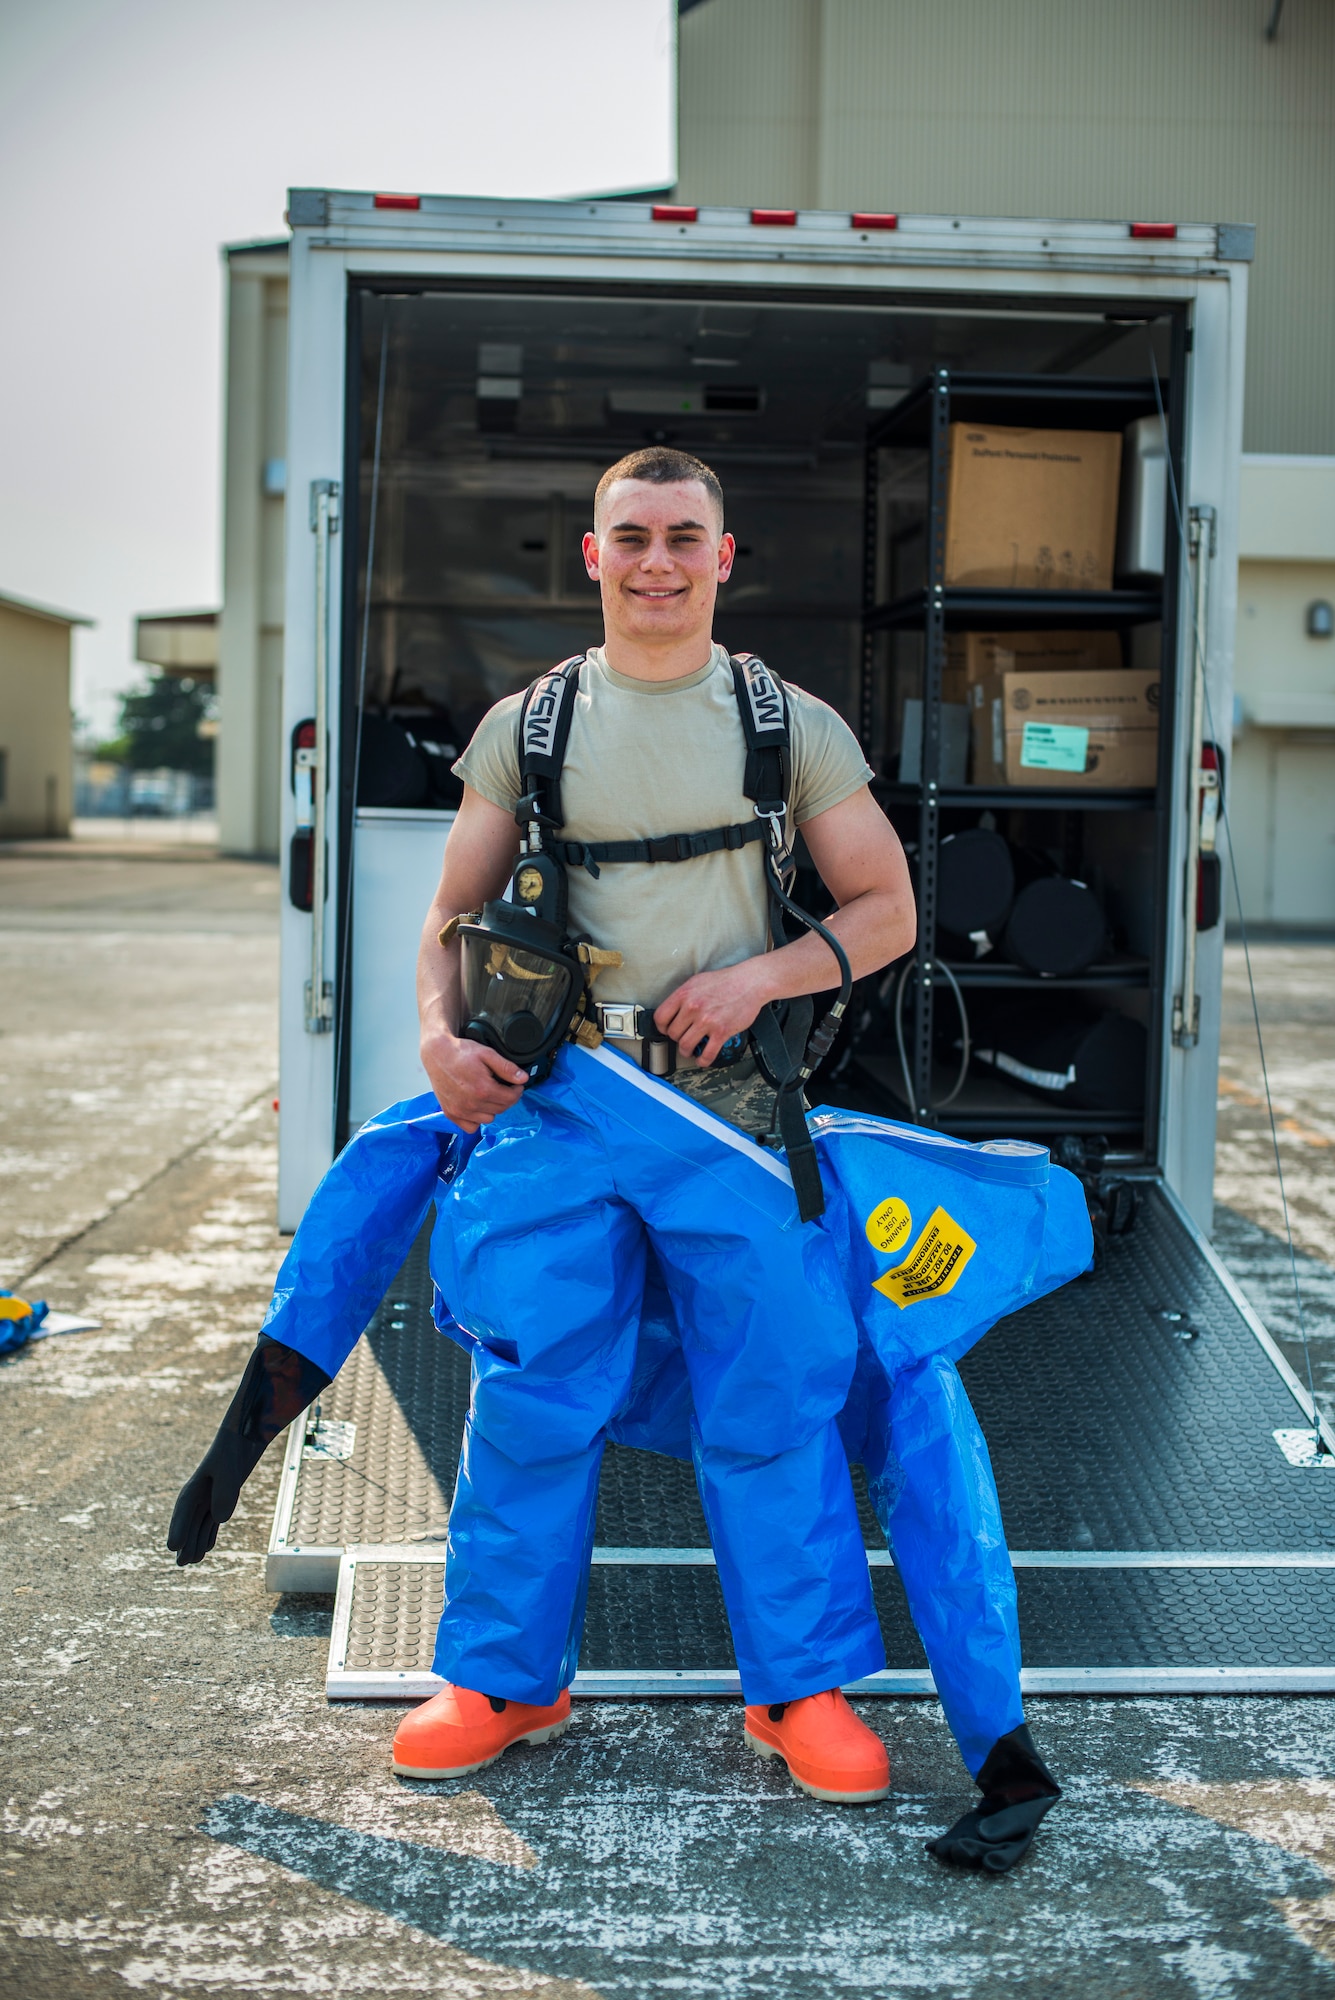 U.S. Air Force Airman 1st Class Petri Brand, a bioenvironmental engineer journeyman with the Aerospace Medicine Squadron, poses for a portrait at Misawa Air Base, Japan, May 19, 2016. Brand was recognized as the Wild Weasel of the Week by the 35th AMDS for his superior performance, outstanding work ethic and overall good conduct and discipline. (U.S. Air Force photo by Senior Airman Brittany A. Chase)